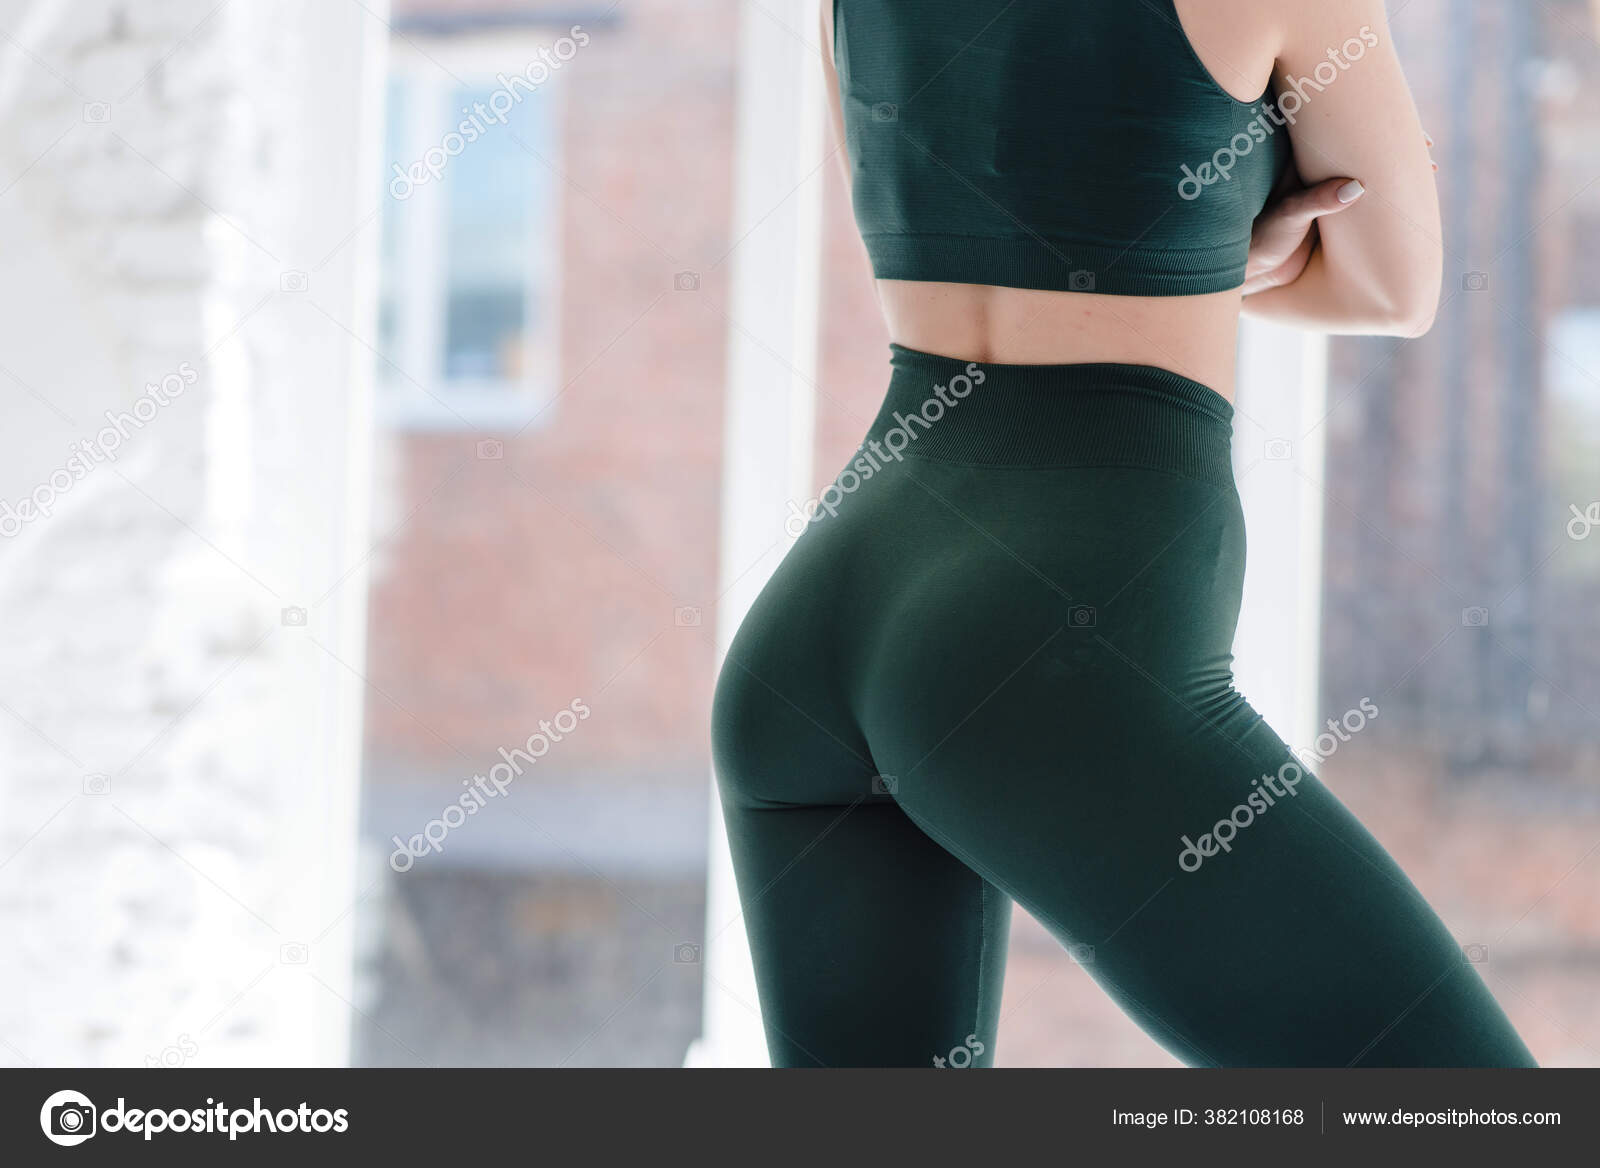 Hot Ass In Tights